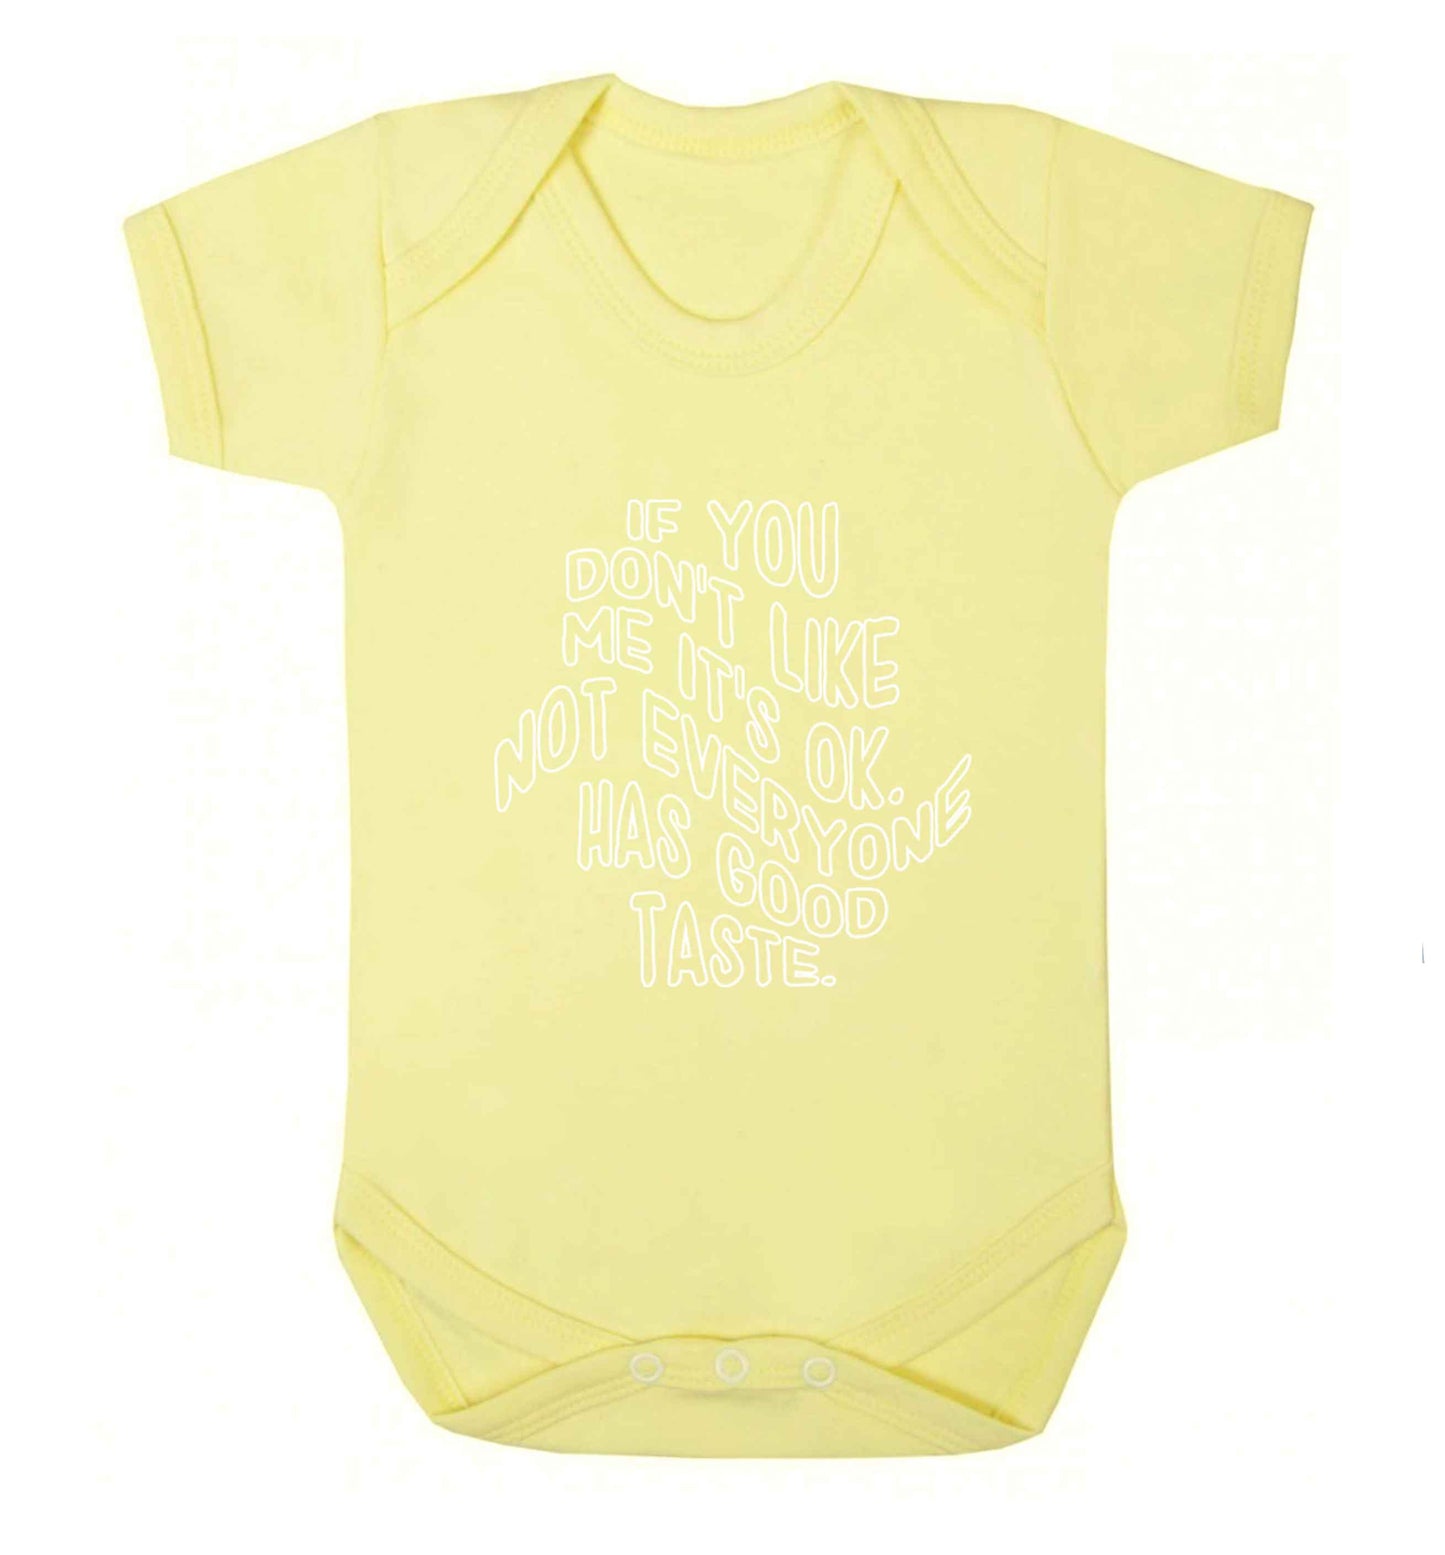 If you don't like me it's ok not everyone has good taste baby vest pale yellow 18-24 months